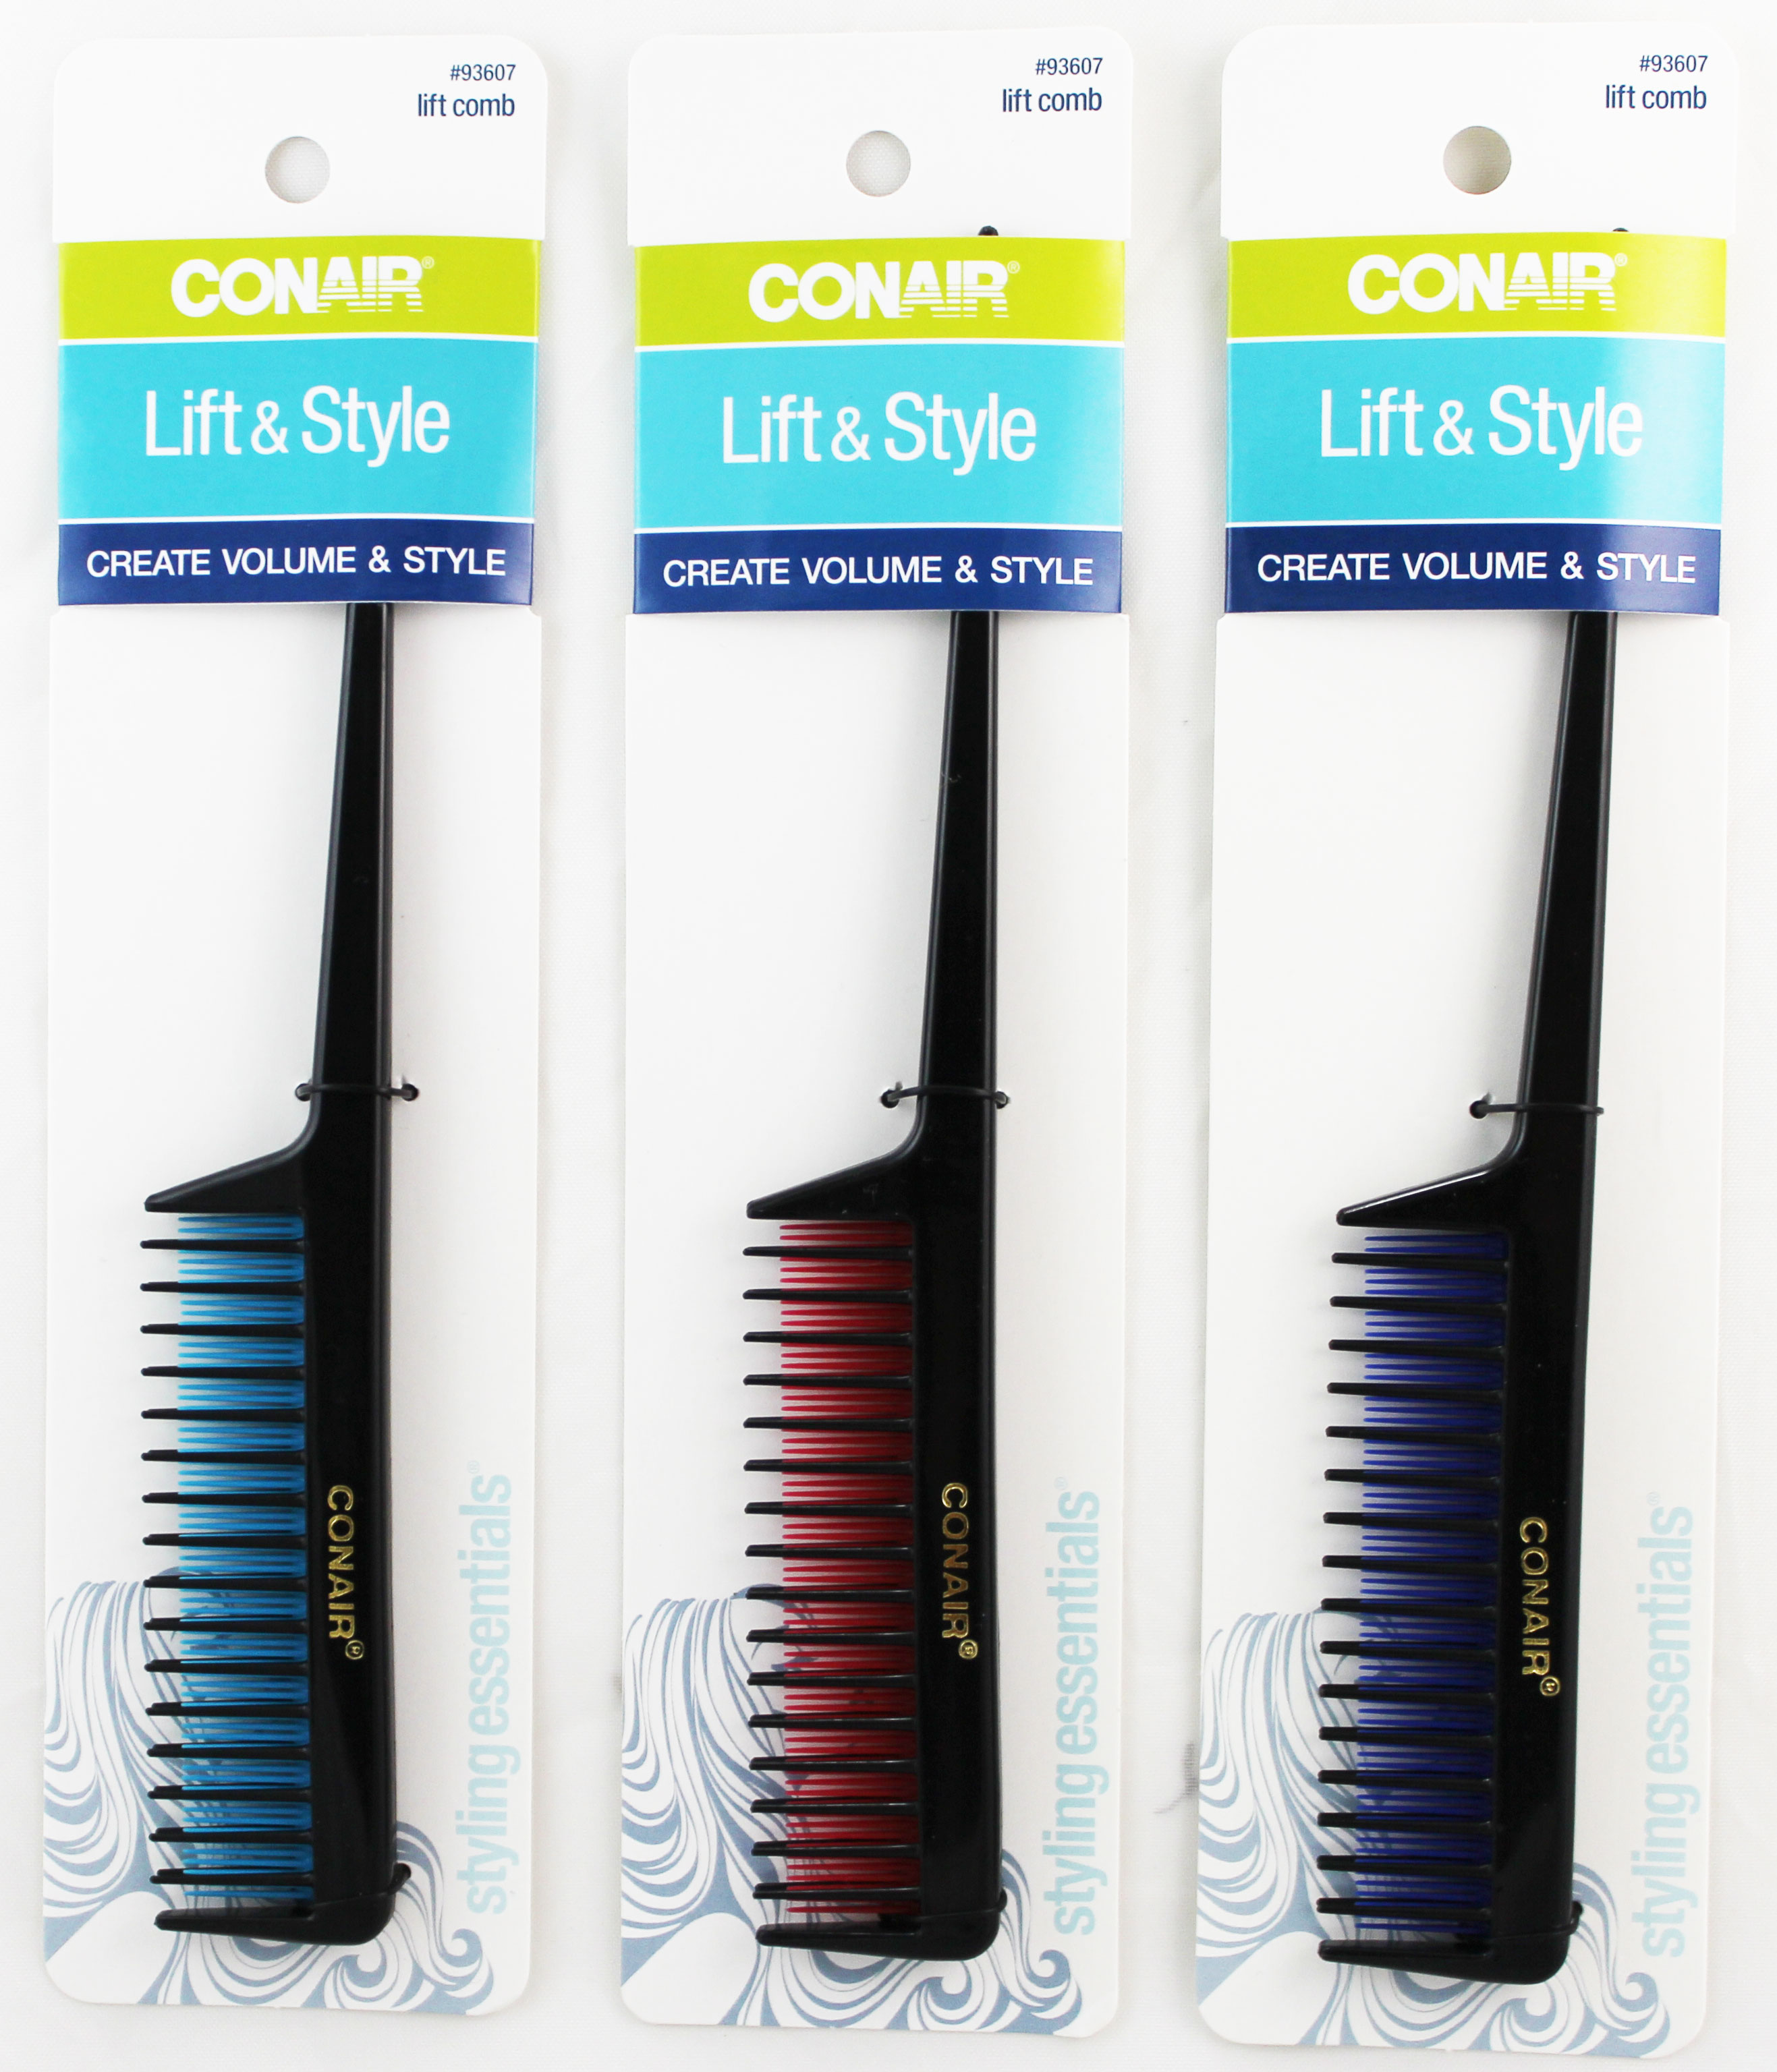 Conair Comb Lift & Style Hair Comb - 1ct